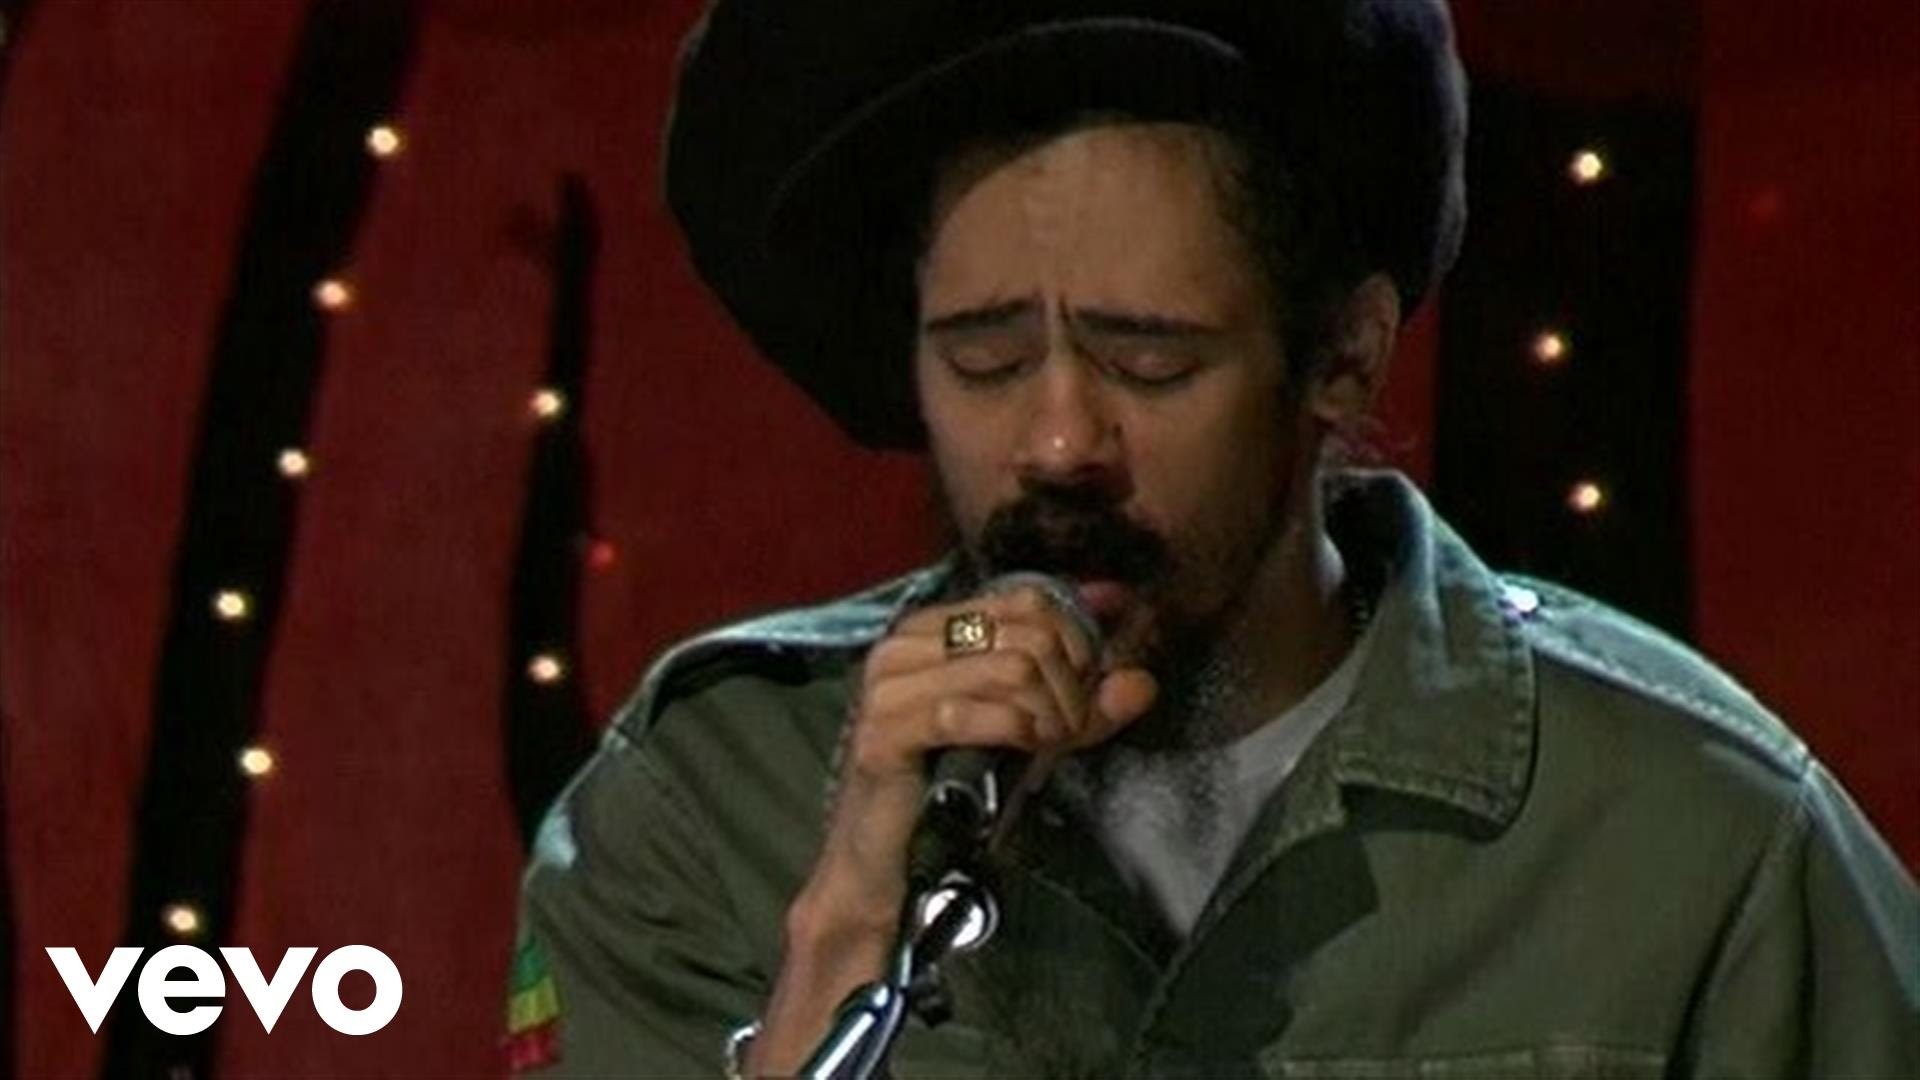 1920x1080 Damian Marley - For The Babies (Live @ VH1.com) ft. Stephen Marley - YouTube